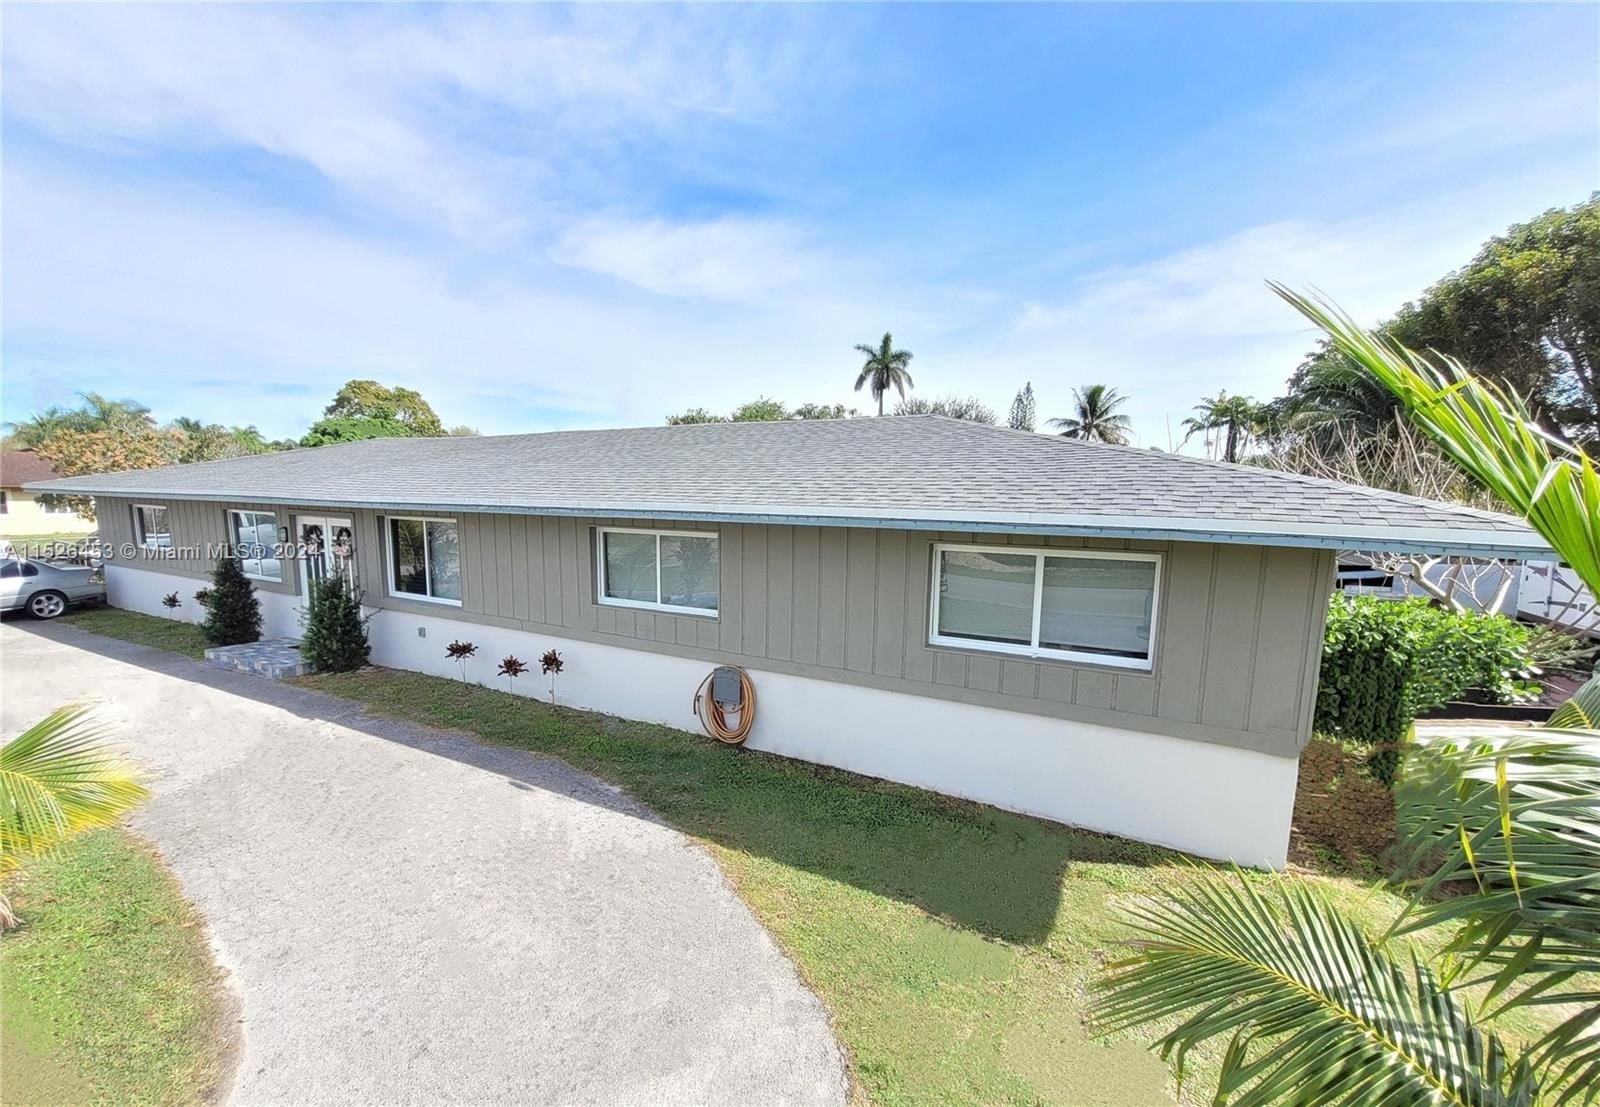 Real estate property located at 545 12th St, Miami-Dade County, PONCE DE LEON, Homestead, FL